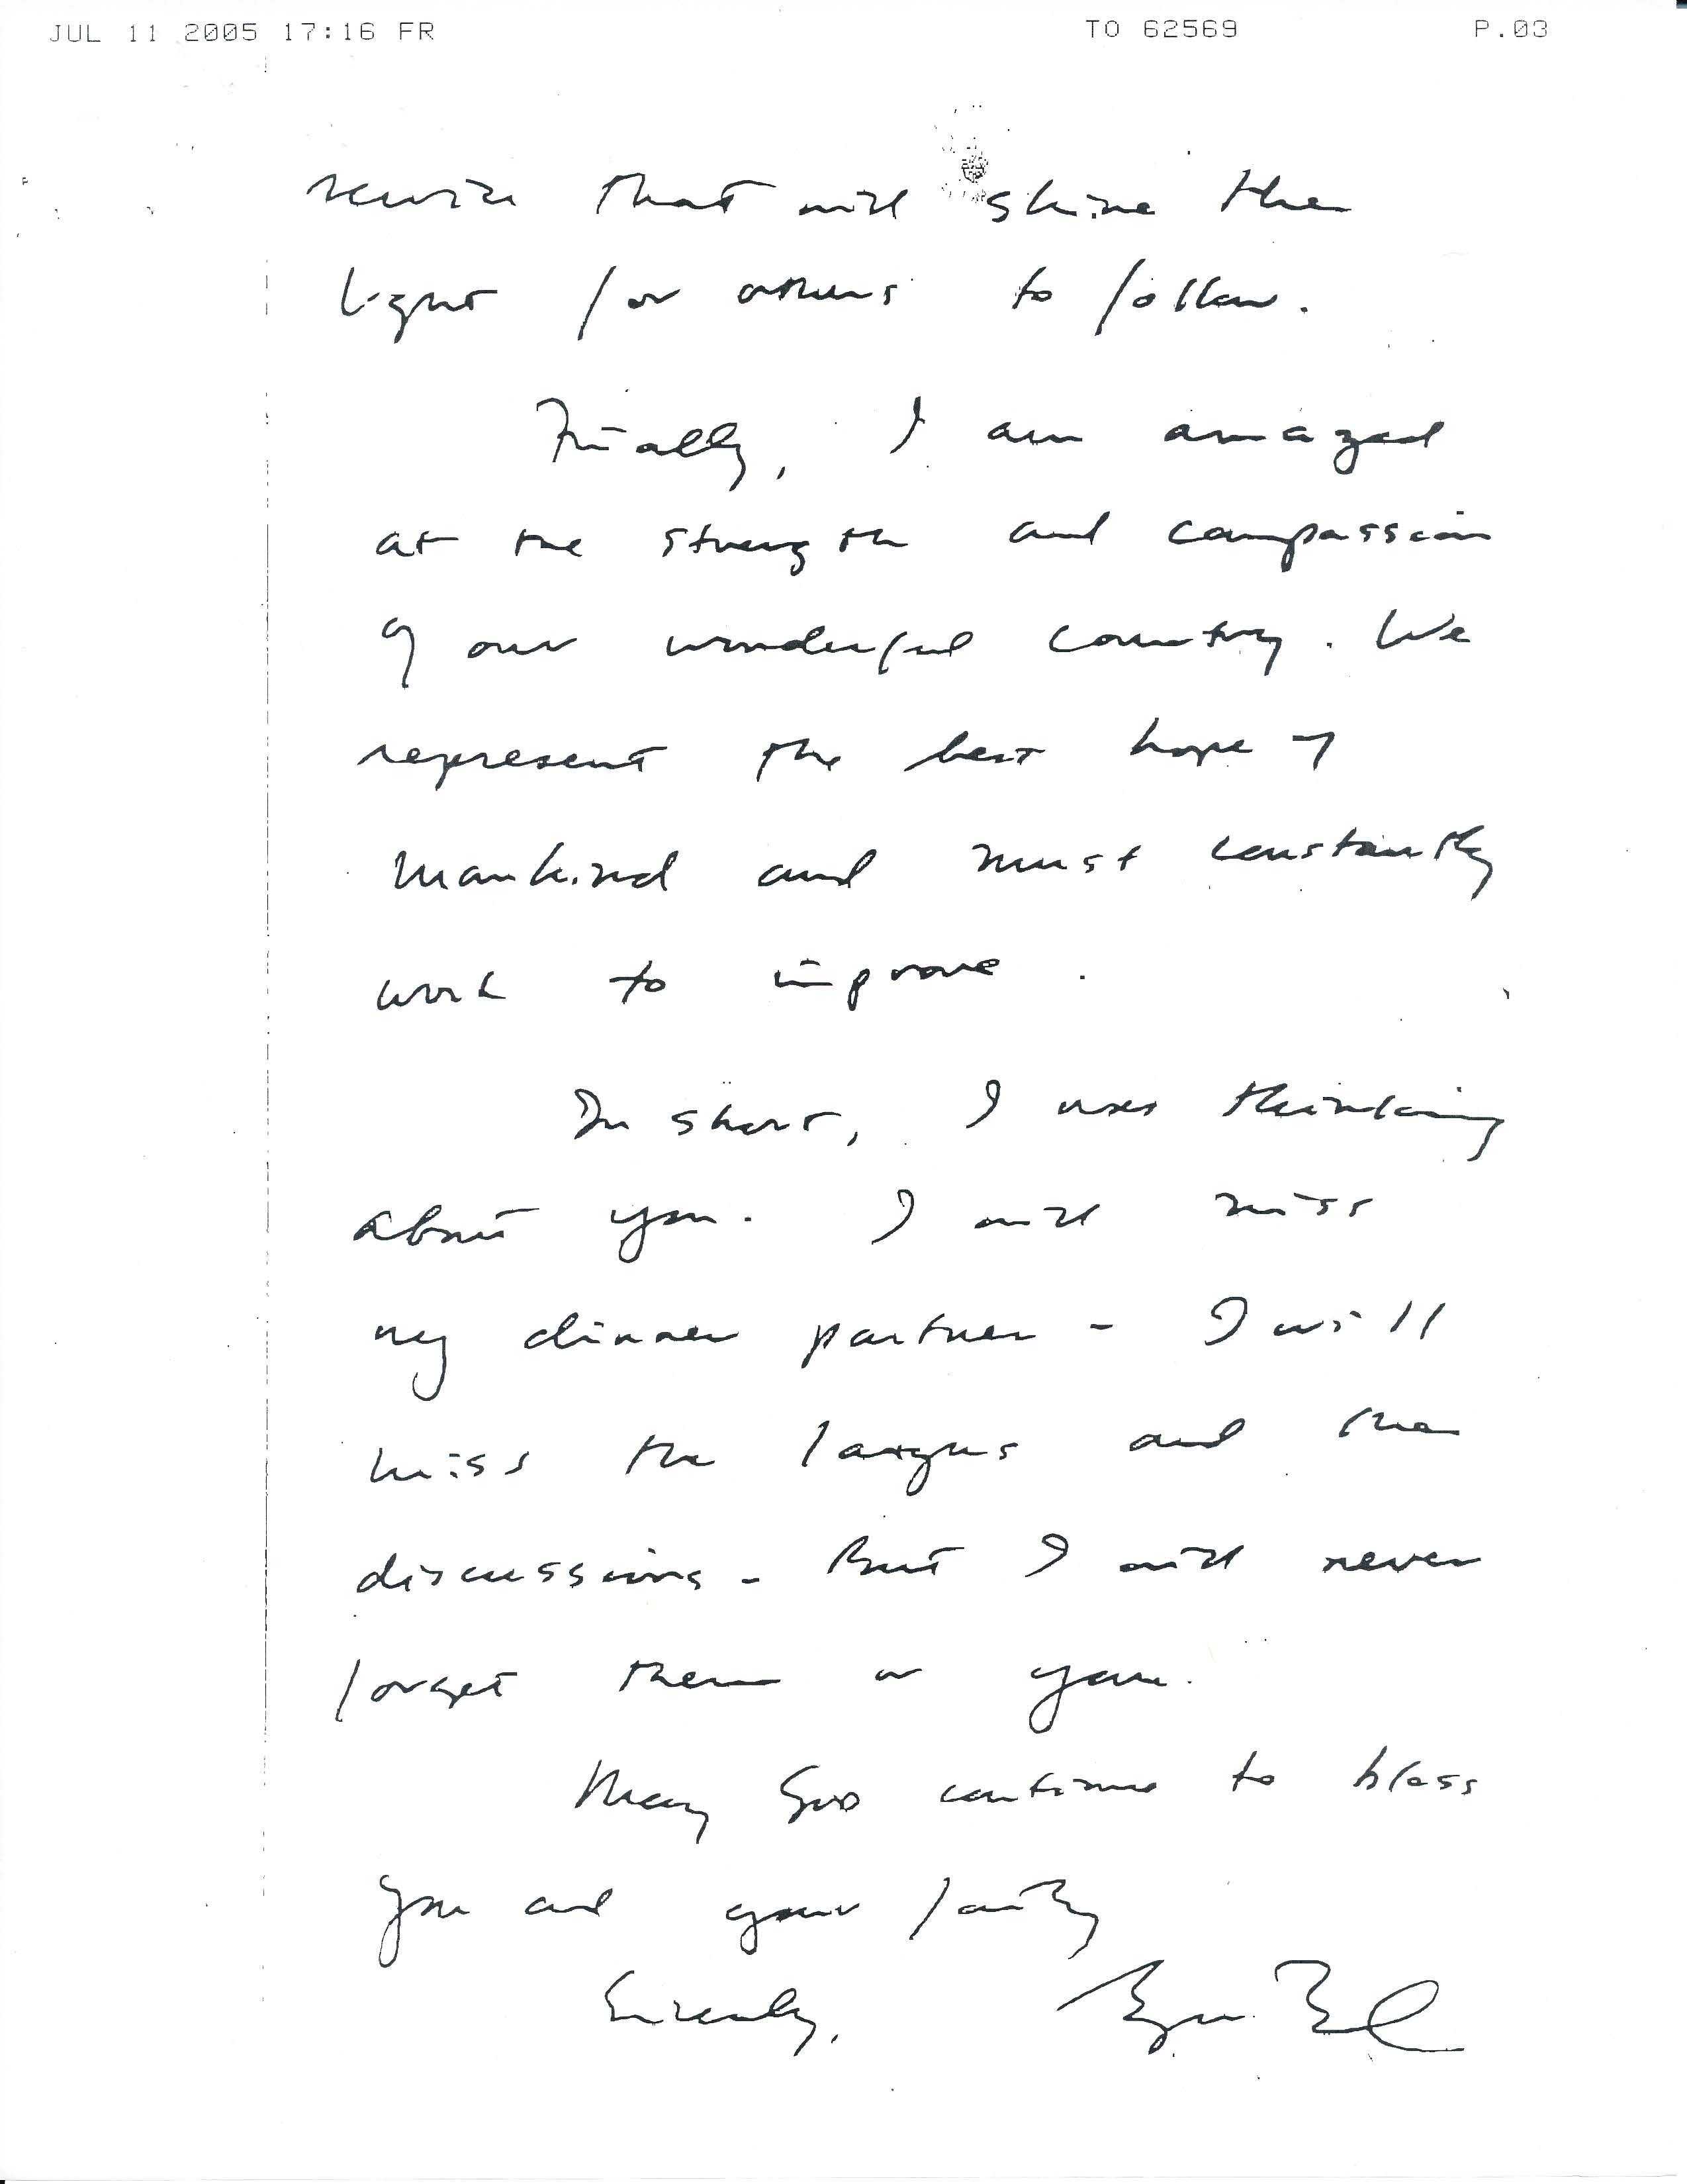 Handwritten letter dated July 4, 2005 to United States Supreme Court Justice Sandra Day O'Connor written by President George W. Bush upon receipt of her resignation. (Page 2 of 2)